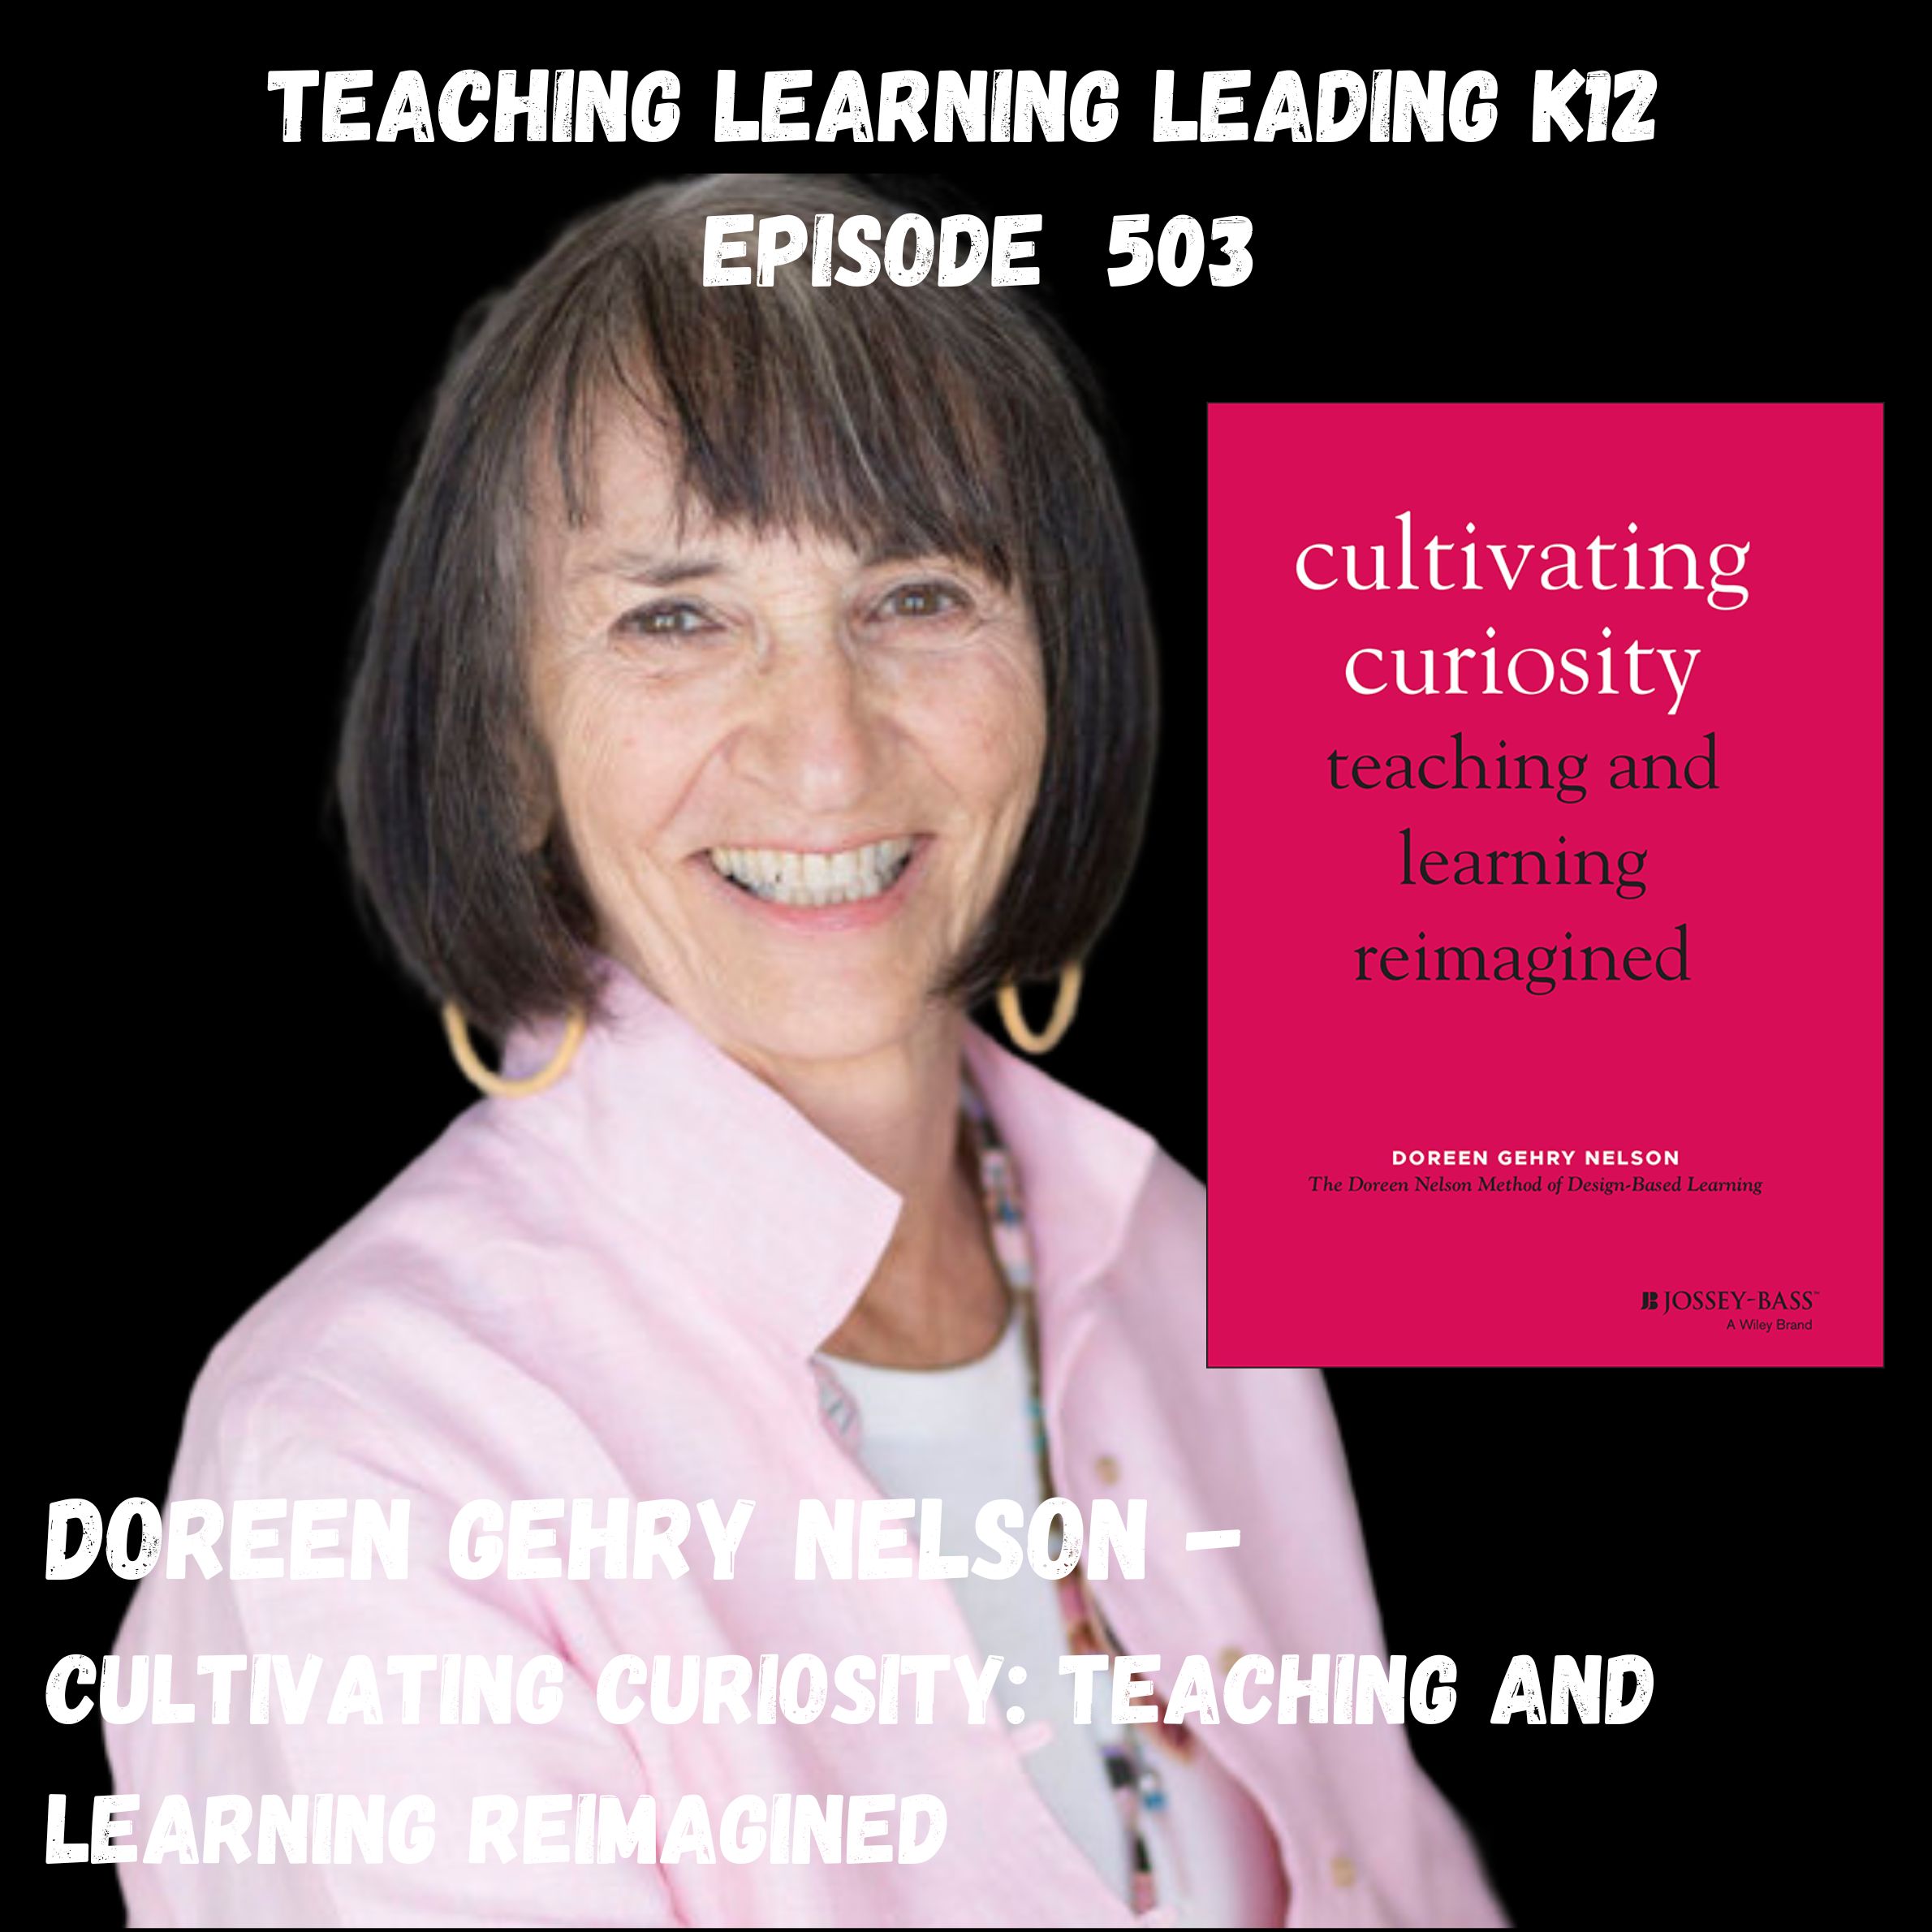 Doreen Gehry Nelson - Cultivating Curiosity: Teaching and Learning Reimagined - 503